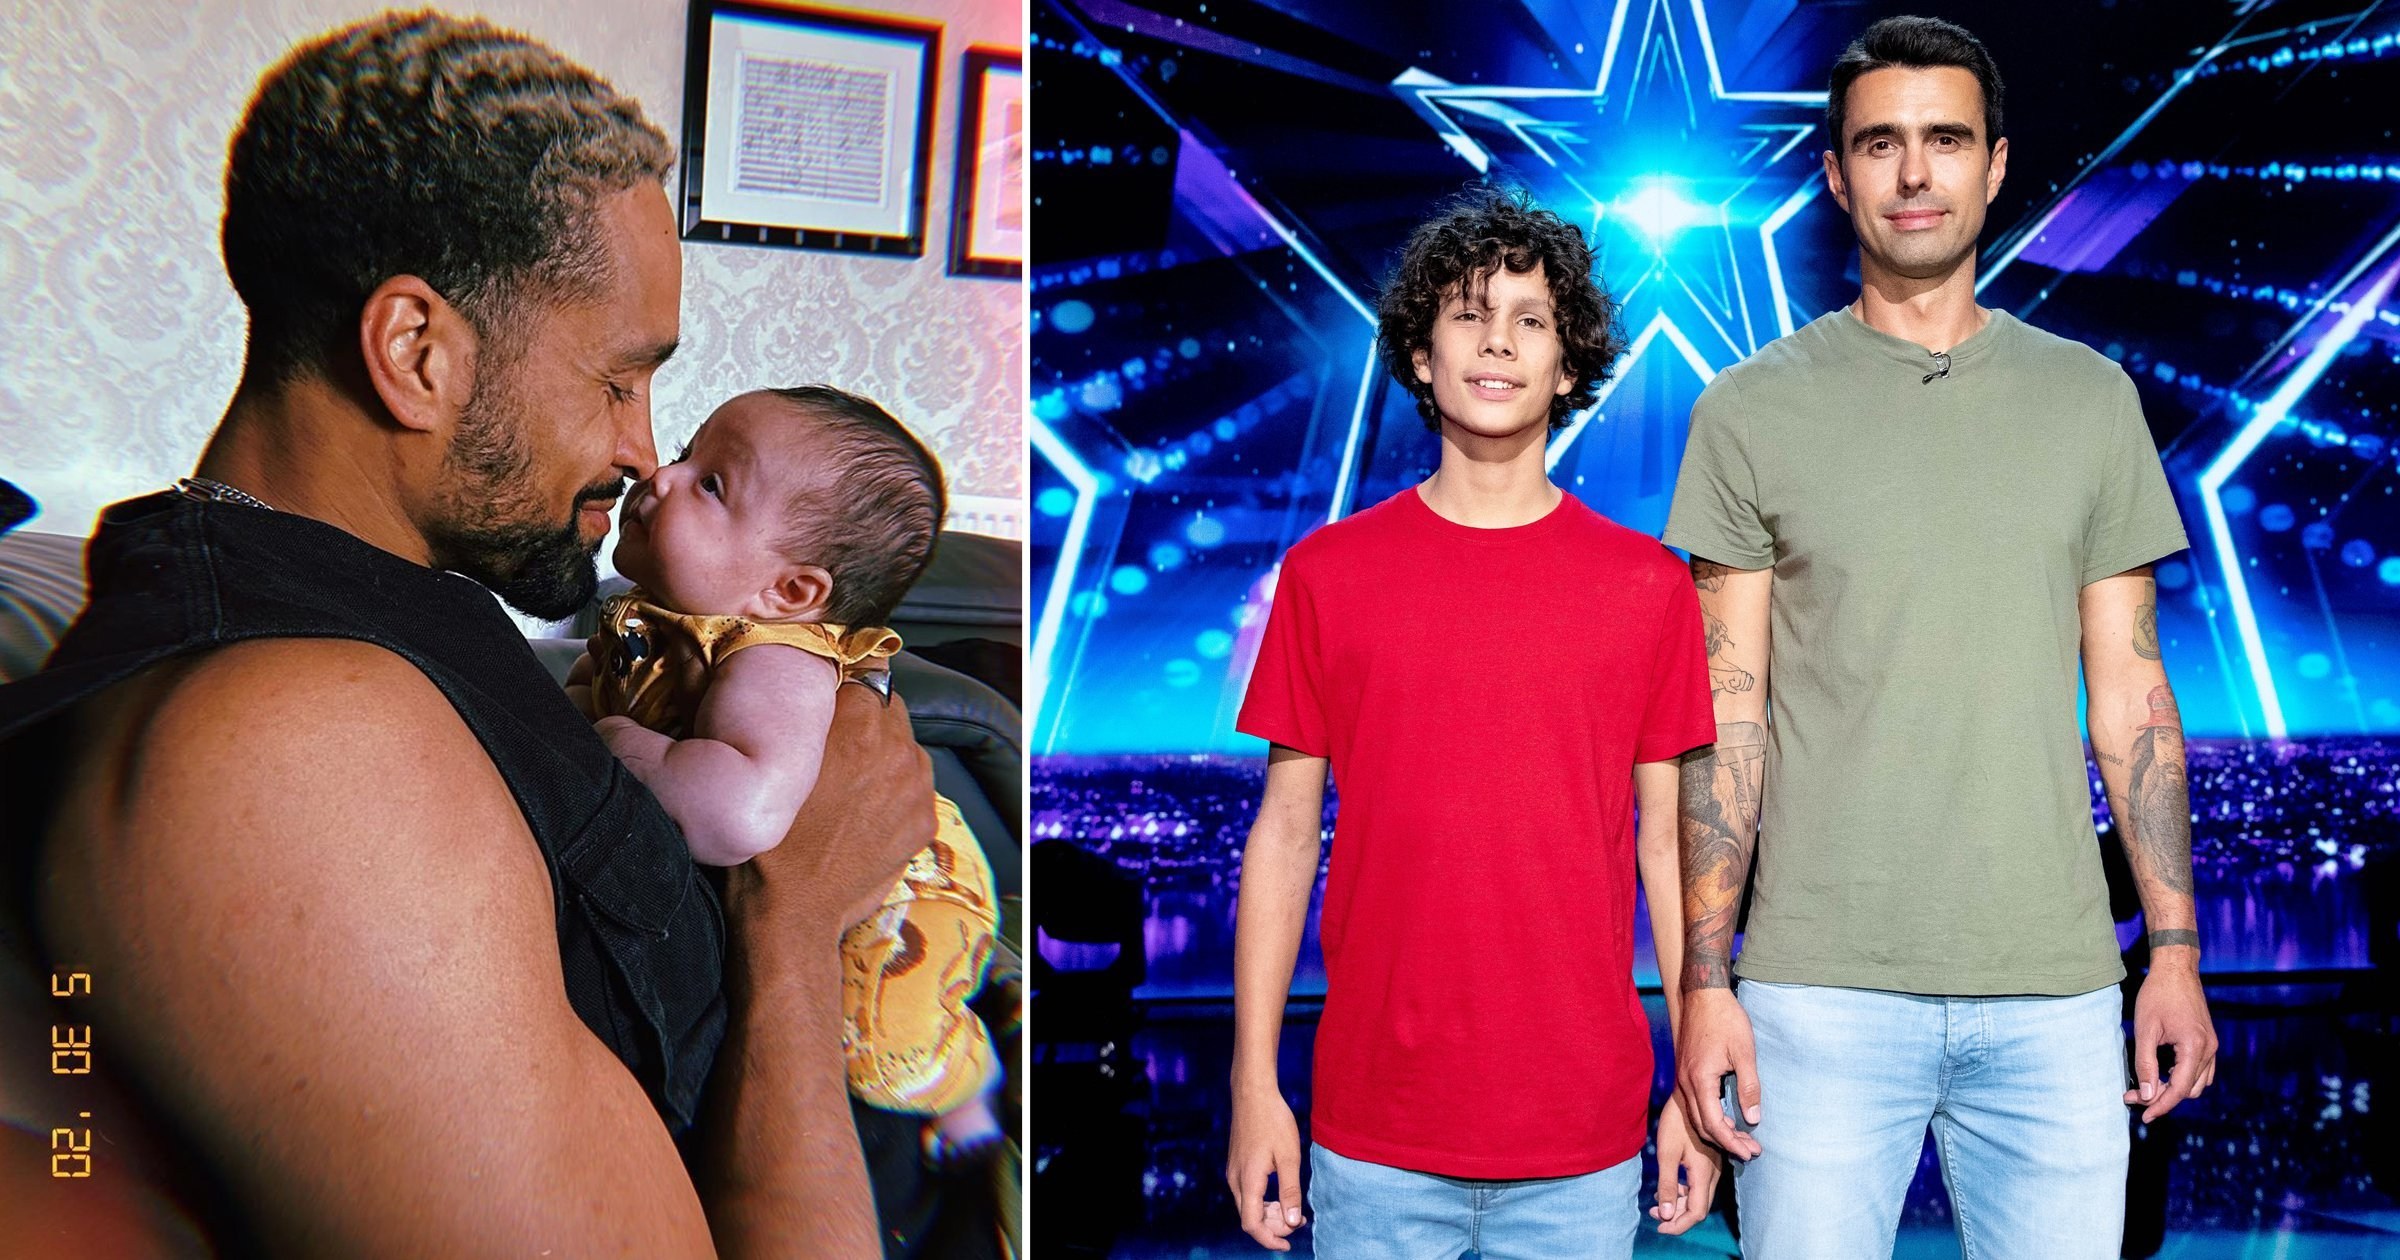 Britain’s Got Talent 2020: Father and son magic act will use Ashley Banjo in emotional semi-final trick